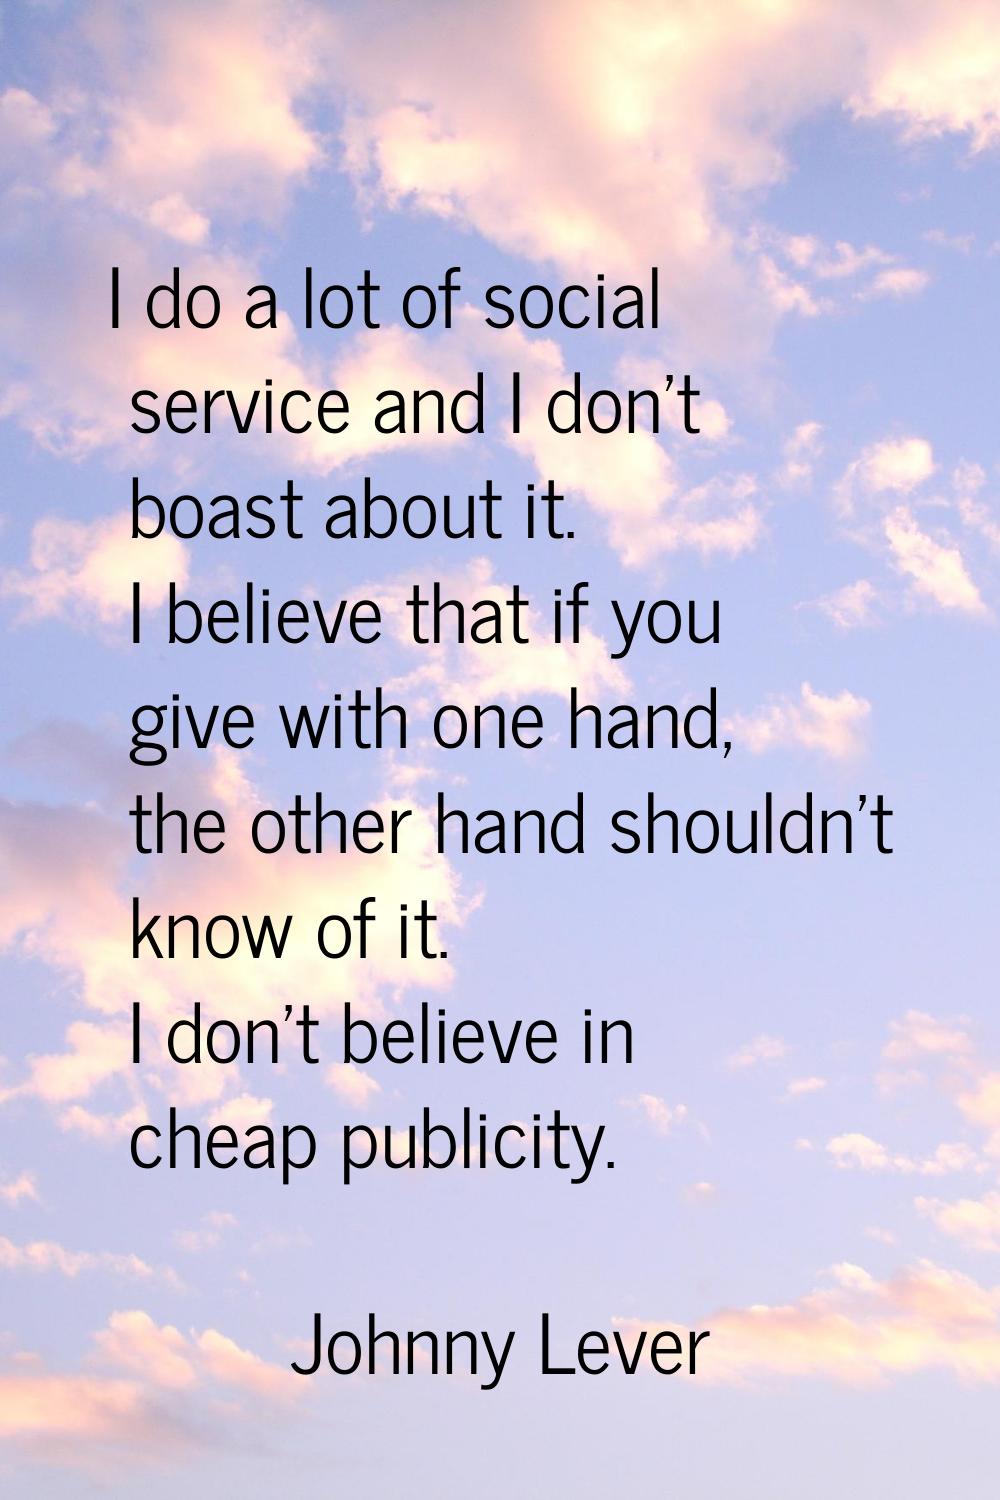 I do a lot of social service and I don't boast about it. I believe that if you give with one hand, 